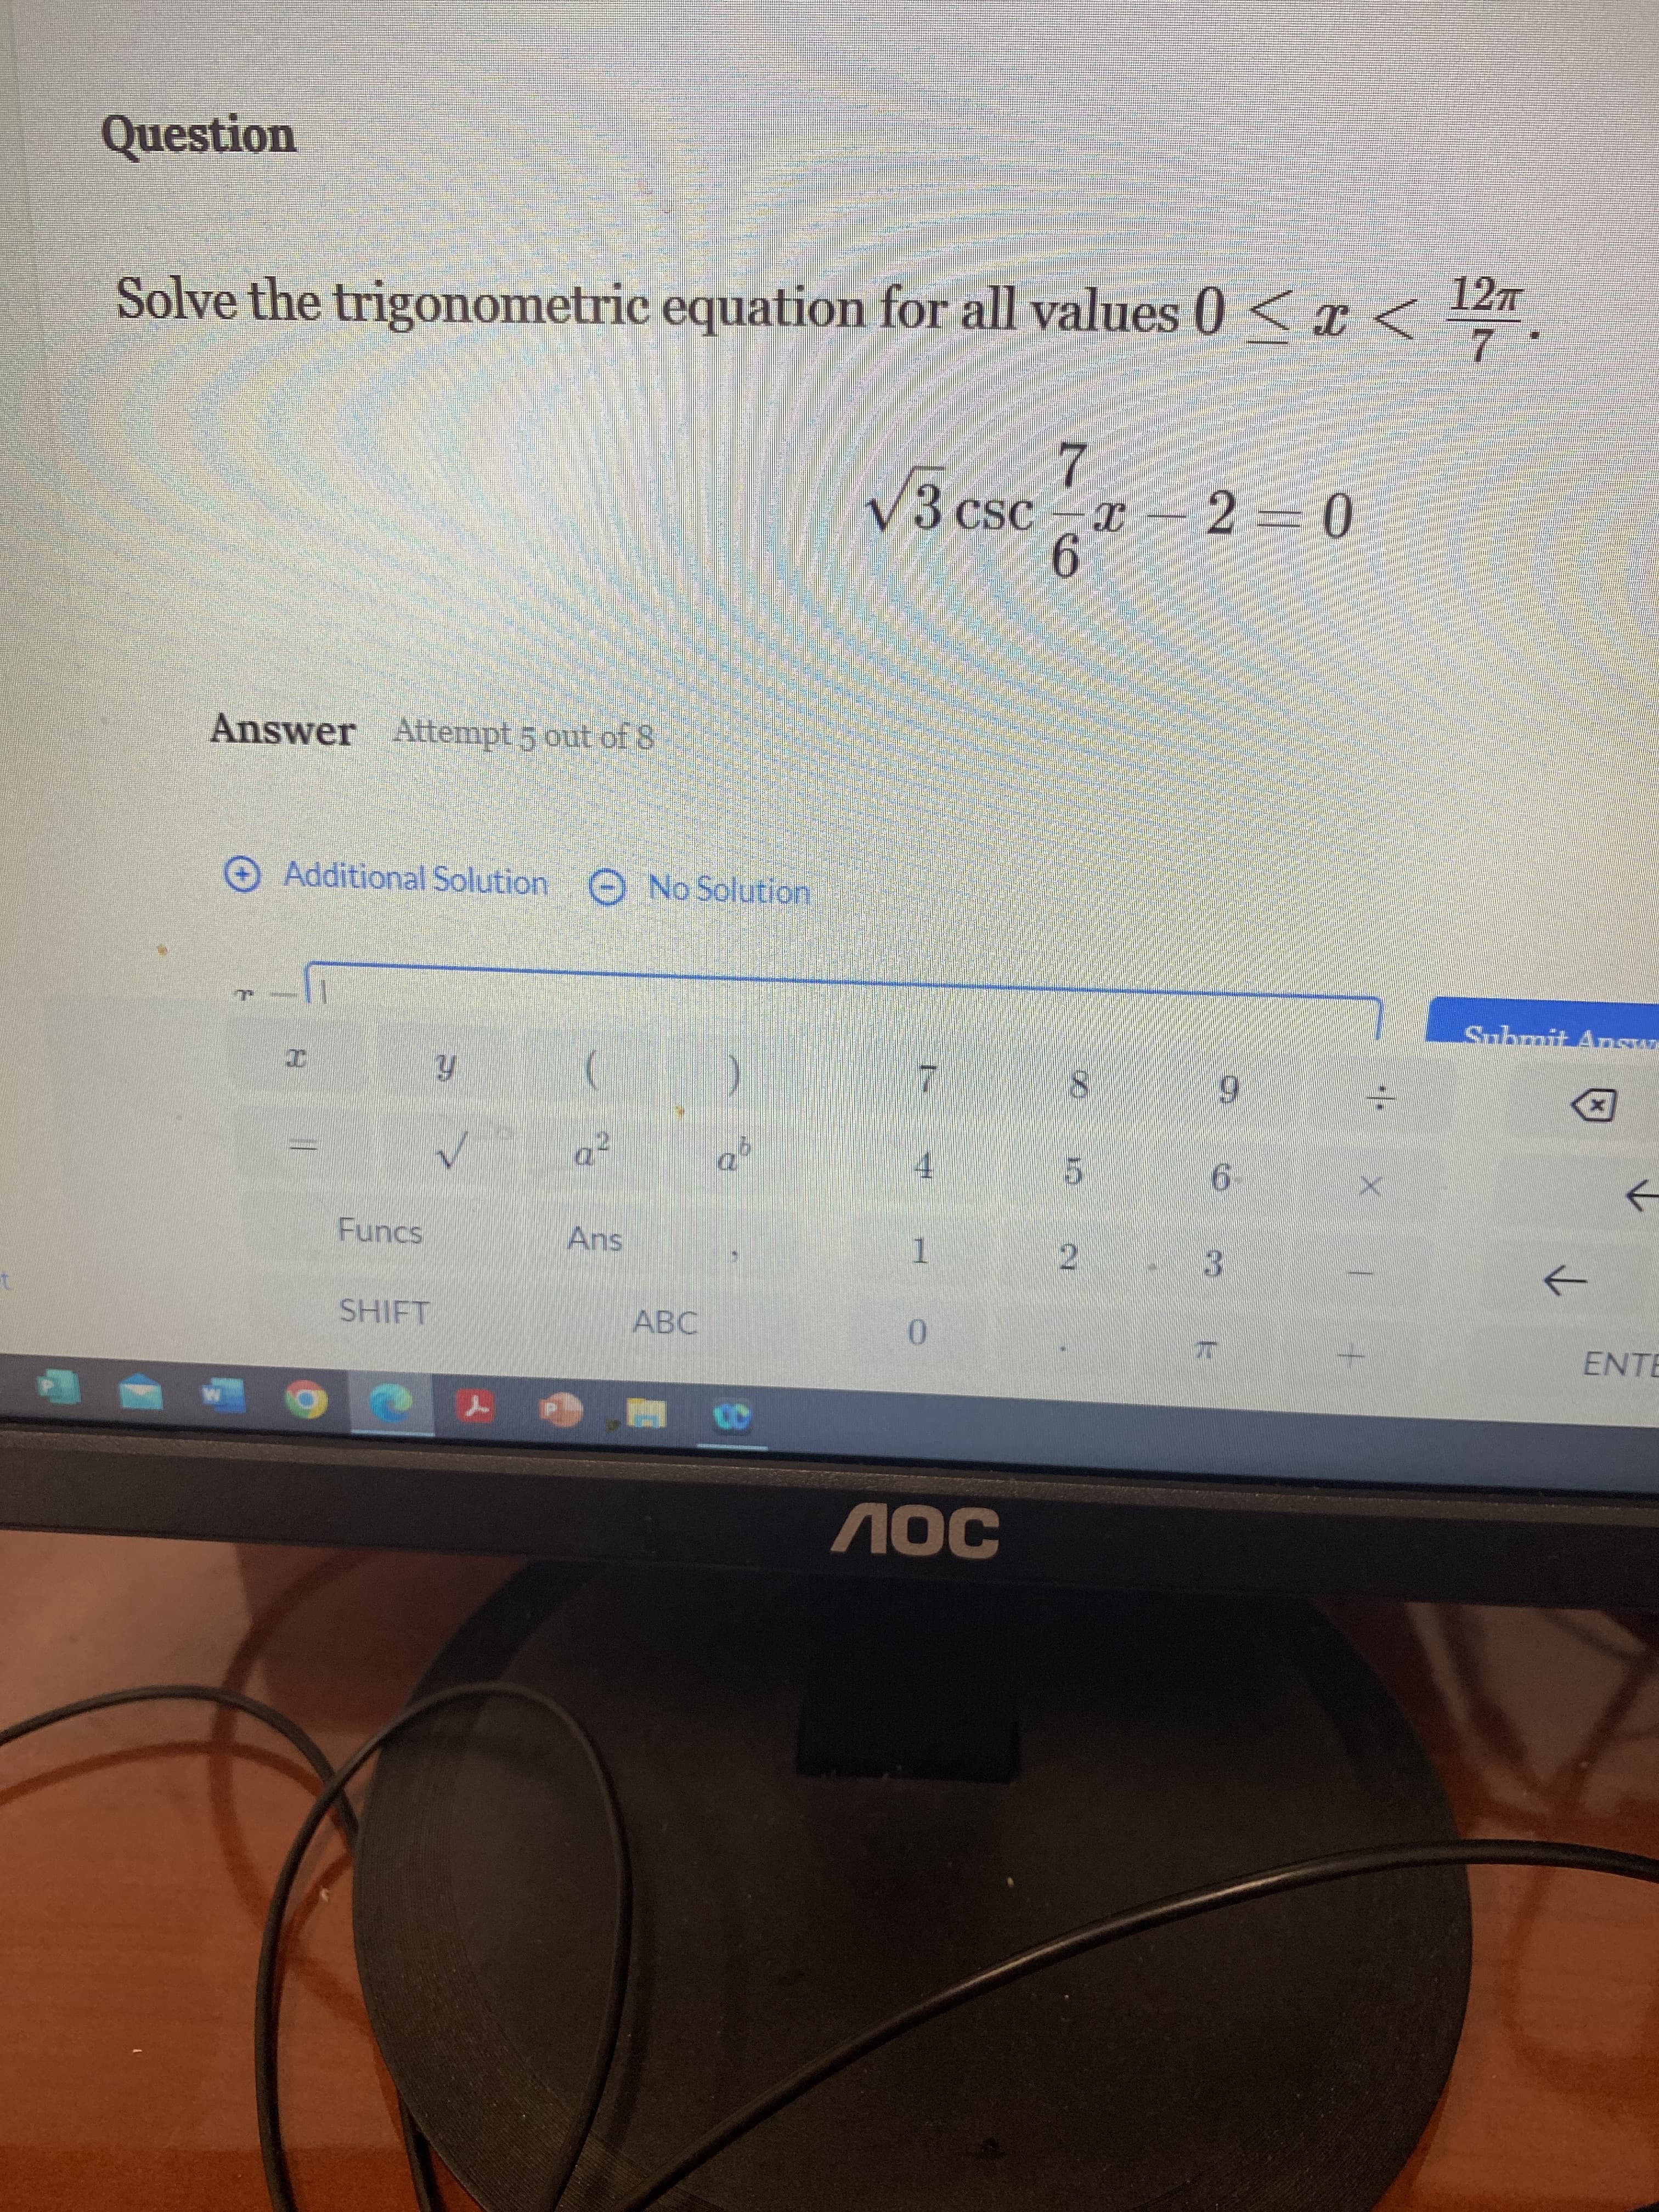 Question
Solve the trigonometric equation for all values 0 < x < 12
7
Answer Attempt 5 out of 8
Additional Solution No Solution
√√3 csc 6°
x2=0
I
Y
(
7
9
√
a²
4
5
6
Funcs
SHIFT
Ans
1
2
41
3
ABC
0
ЛОС
Submit Answe
✓
←
ENTE